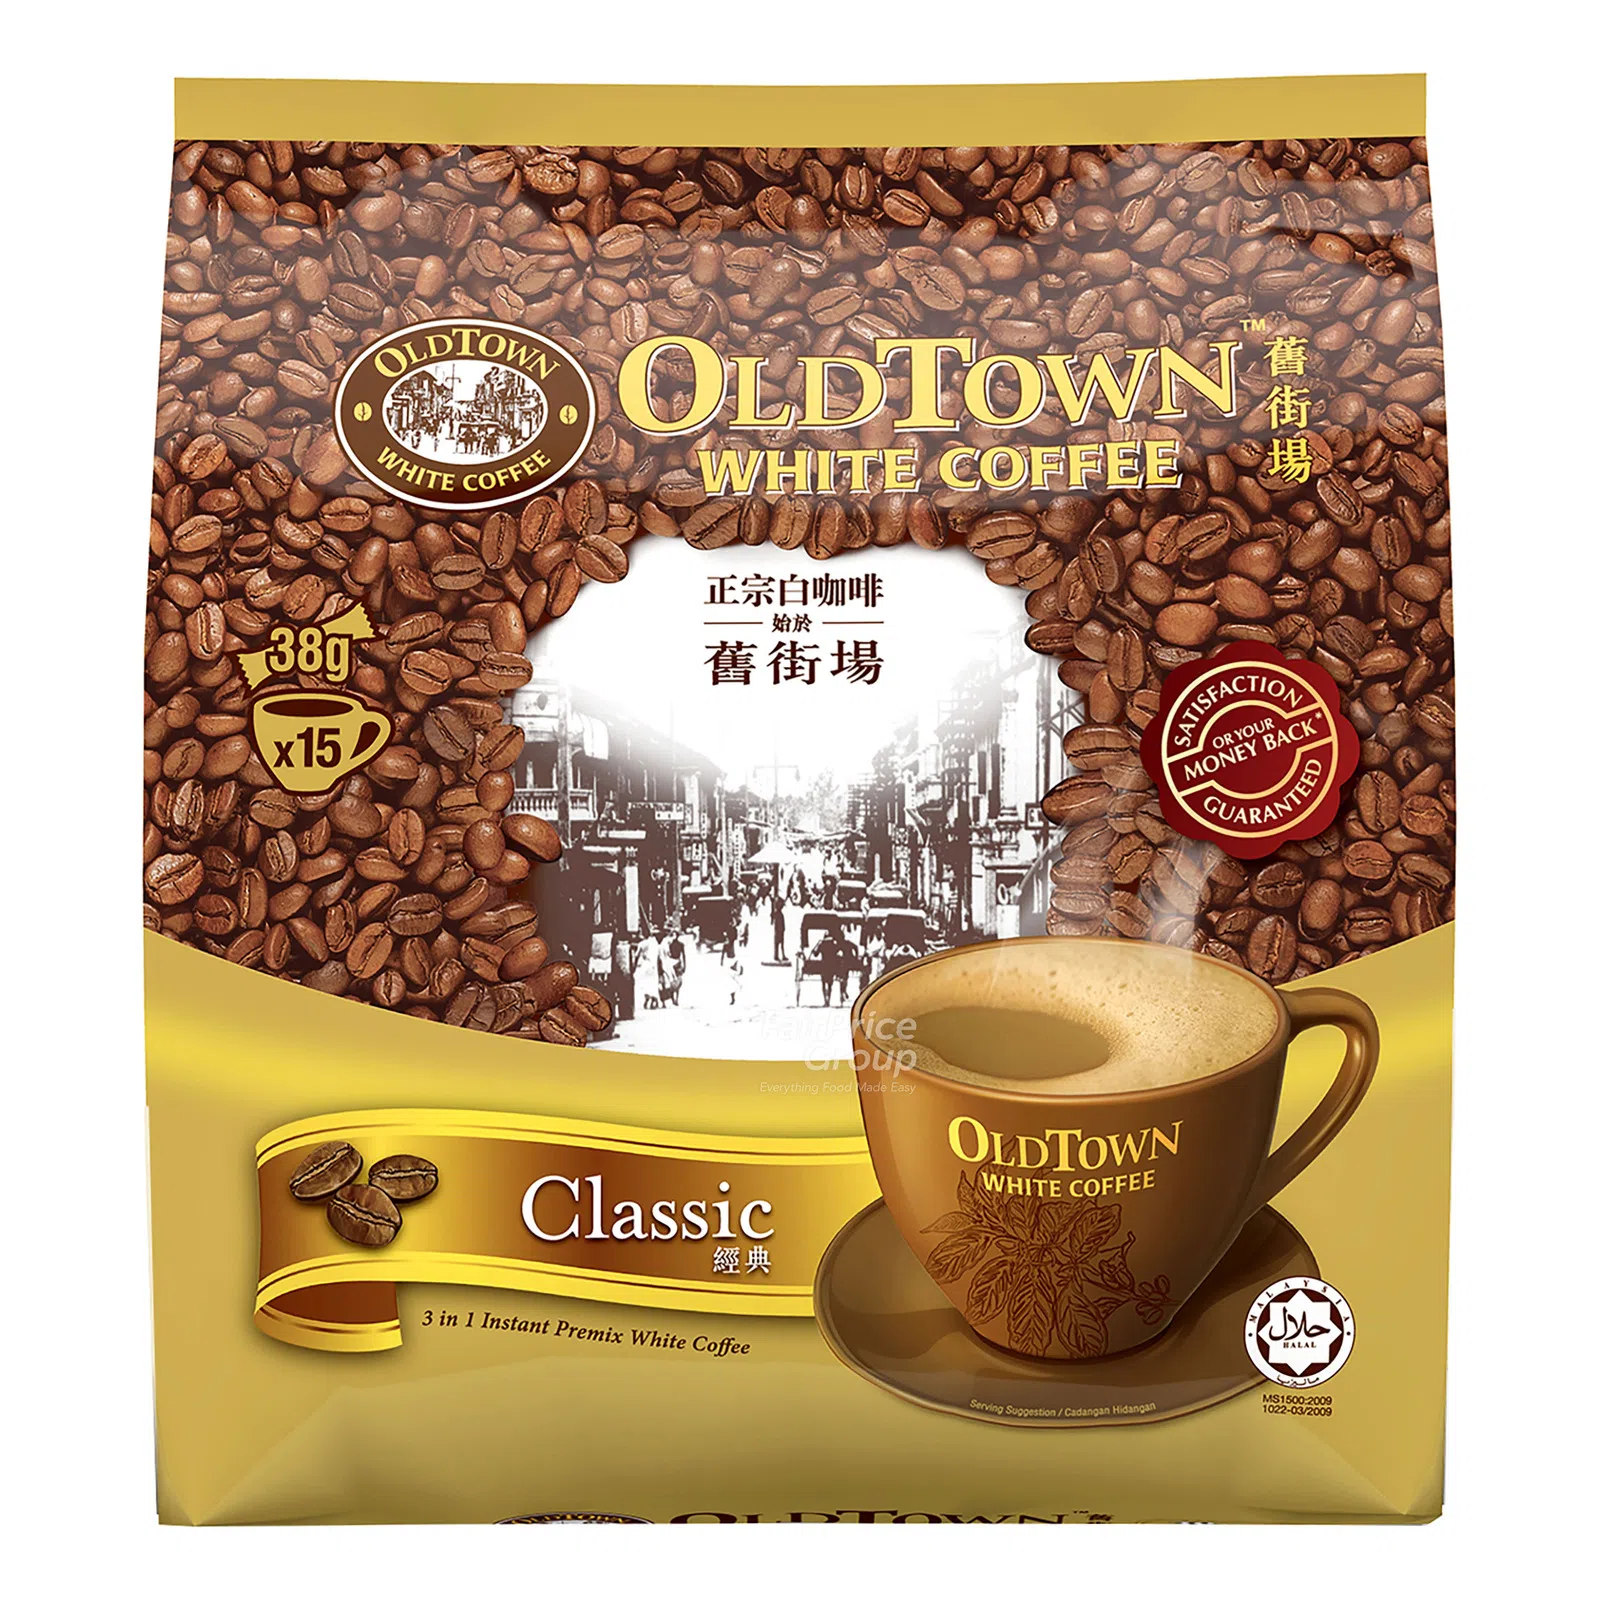 Old town coffee